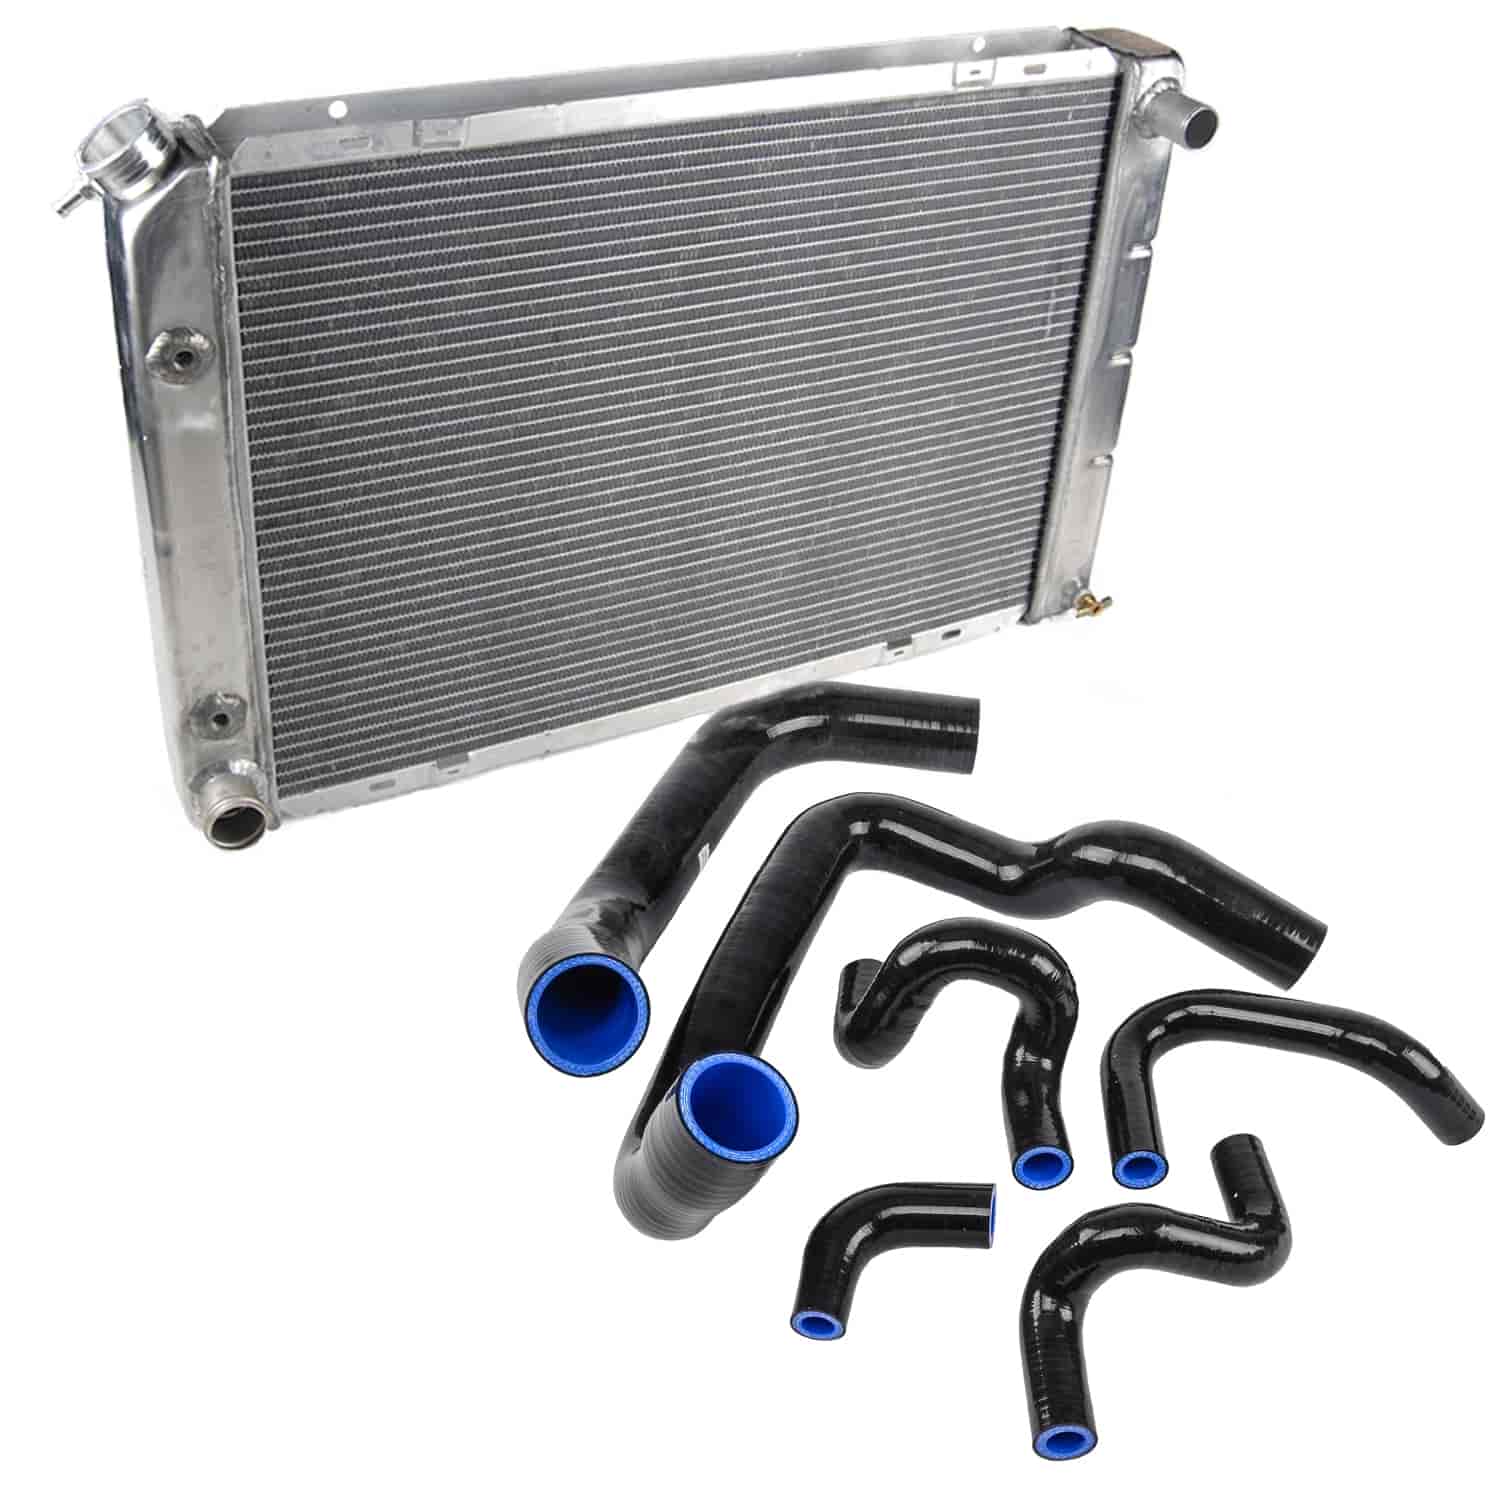 Black Silicone Hose and Radiator Kit for 1986-1993